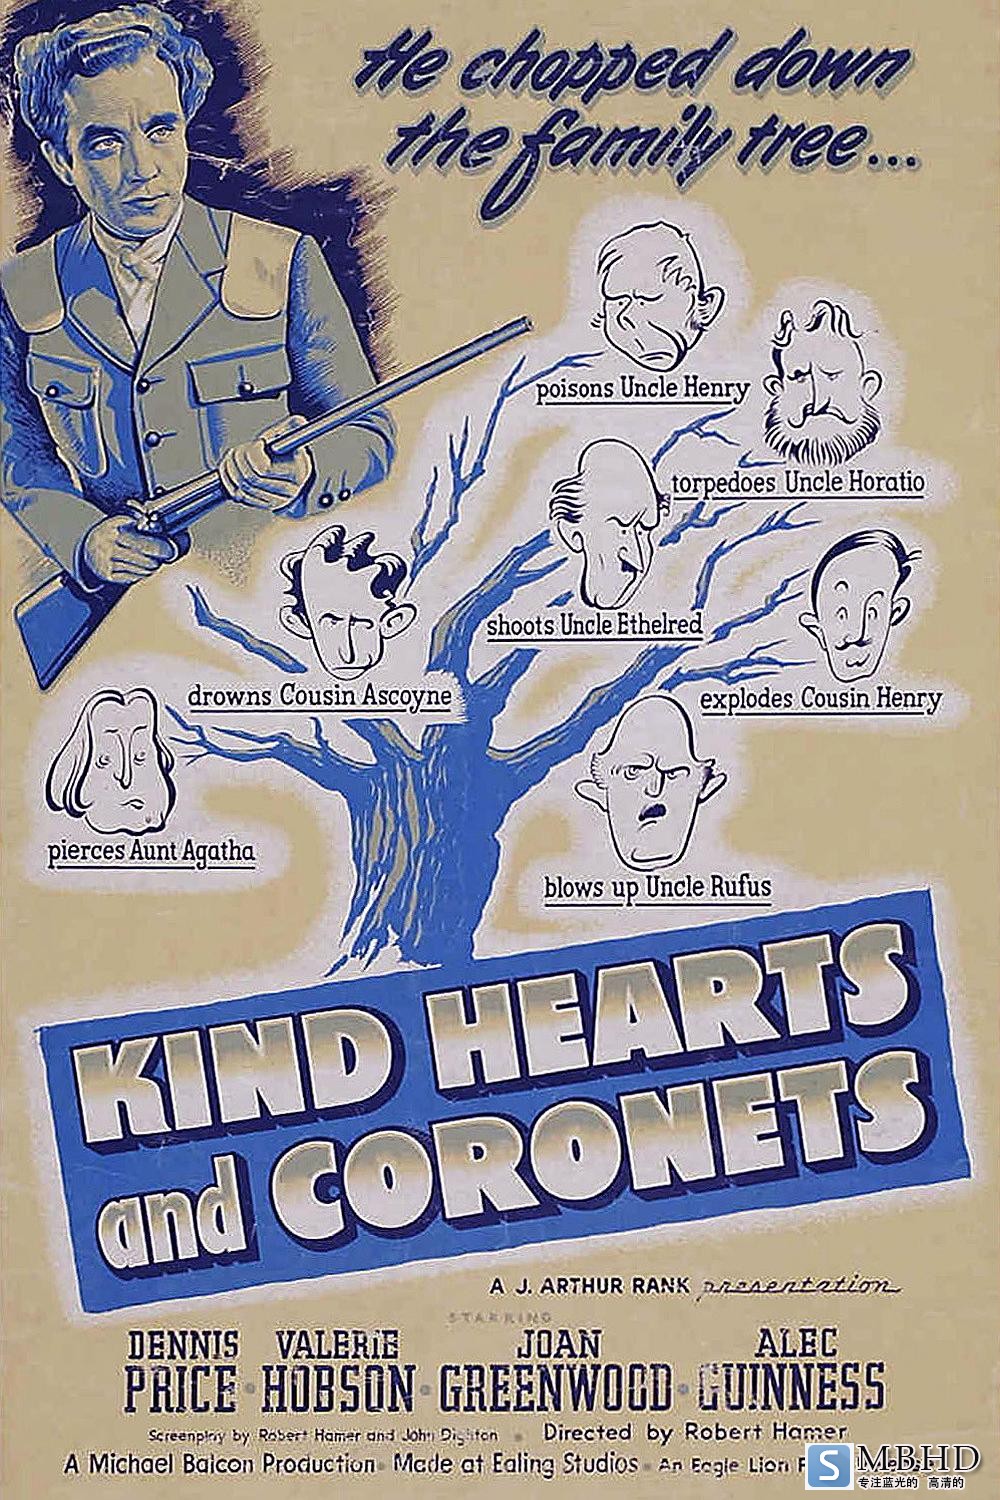 /ĳ Kind.Hearts.and.Coronets.1949.INTERNAL.REMASTERED.1080p.BluRay.X264-1.png